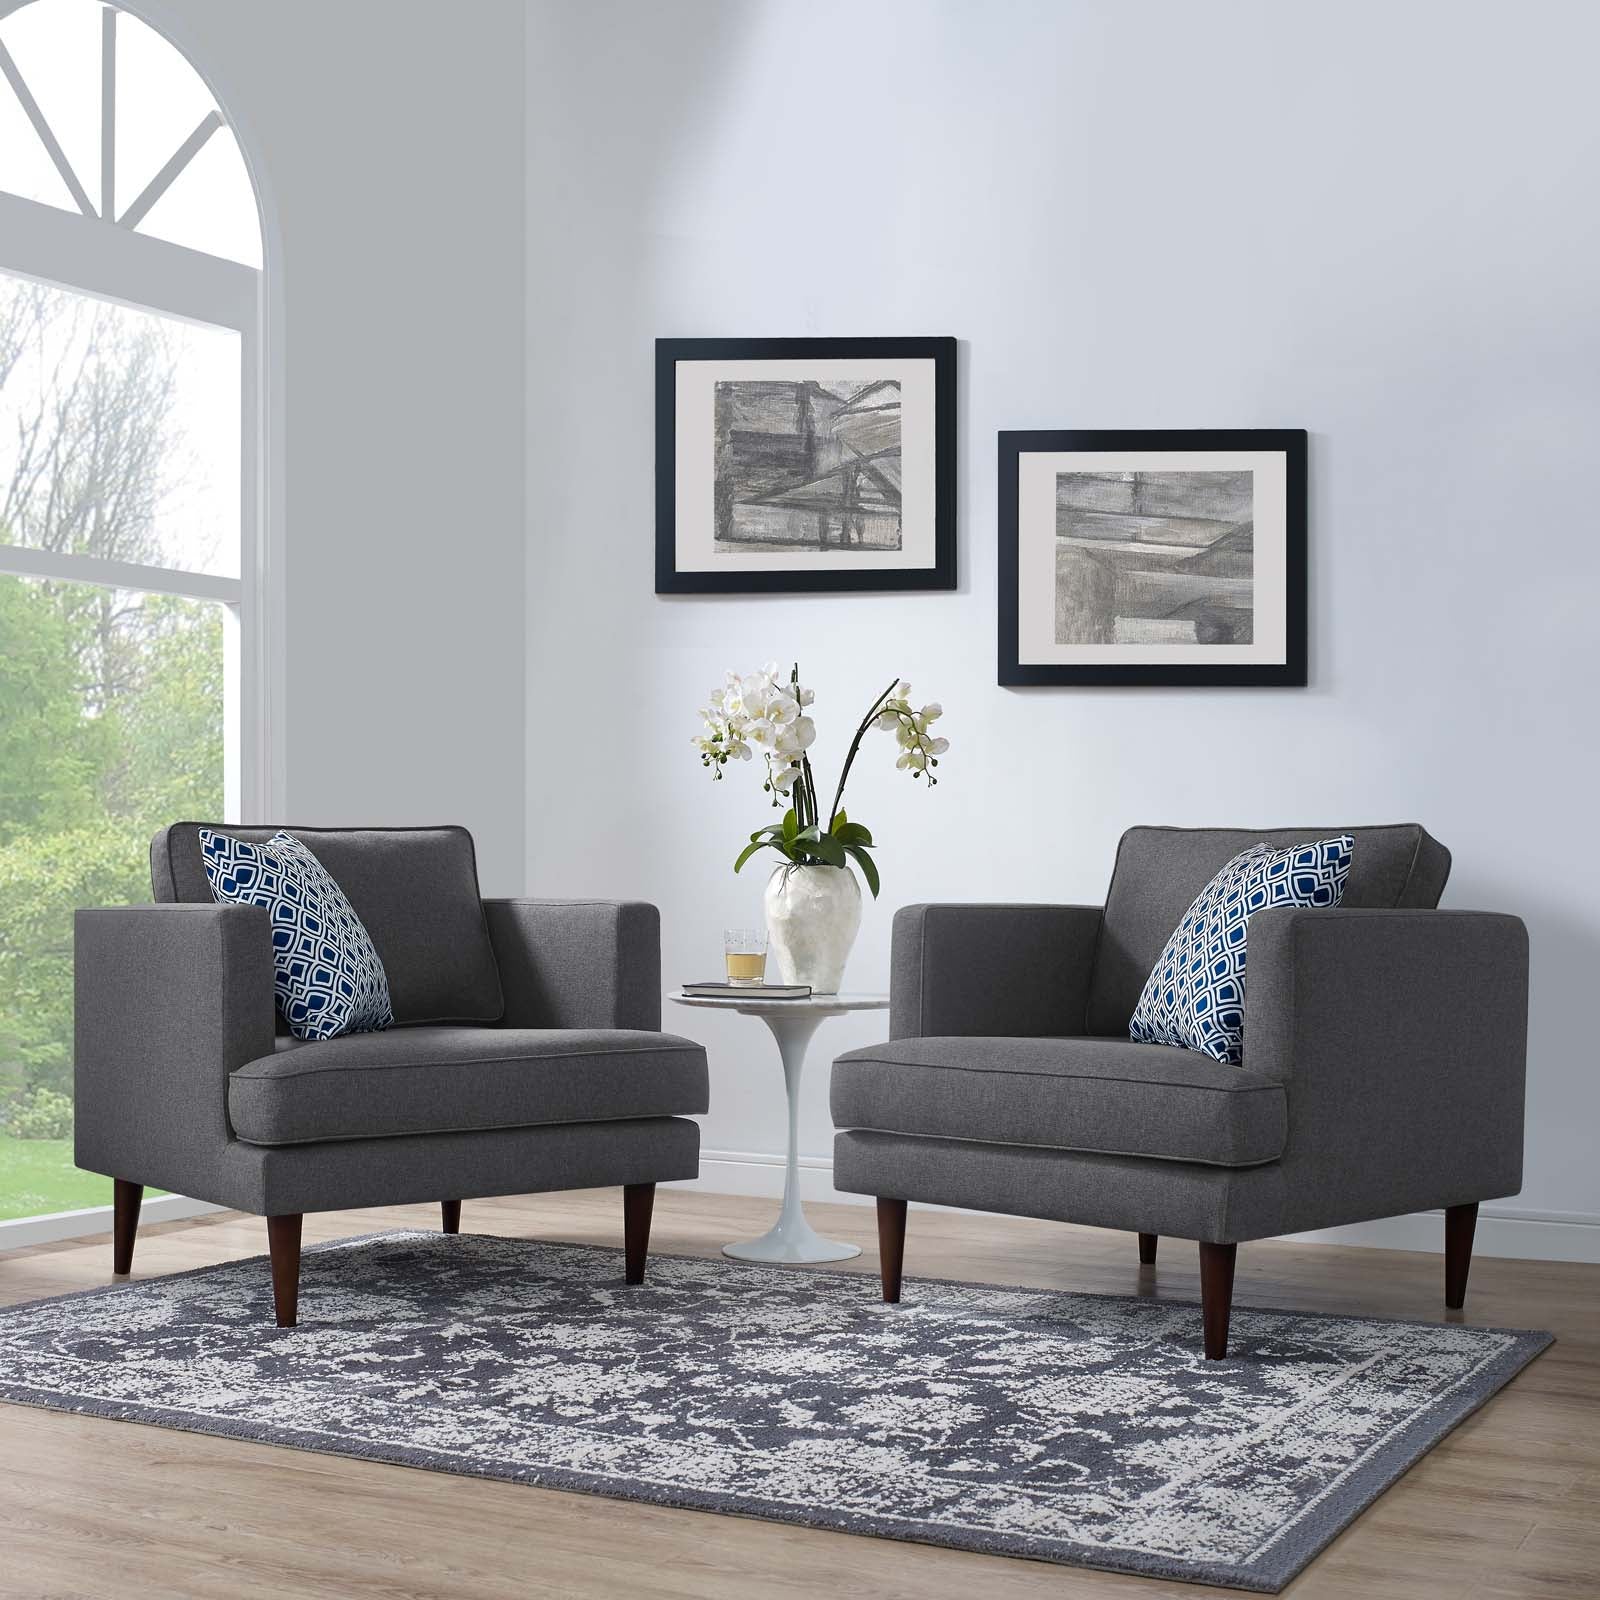 Agile Upholstered Fabric Armchair Set of 2 - East Shore Modern Home Furnishings